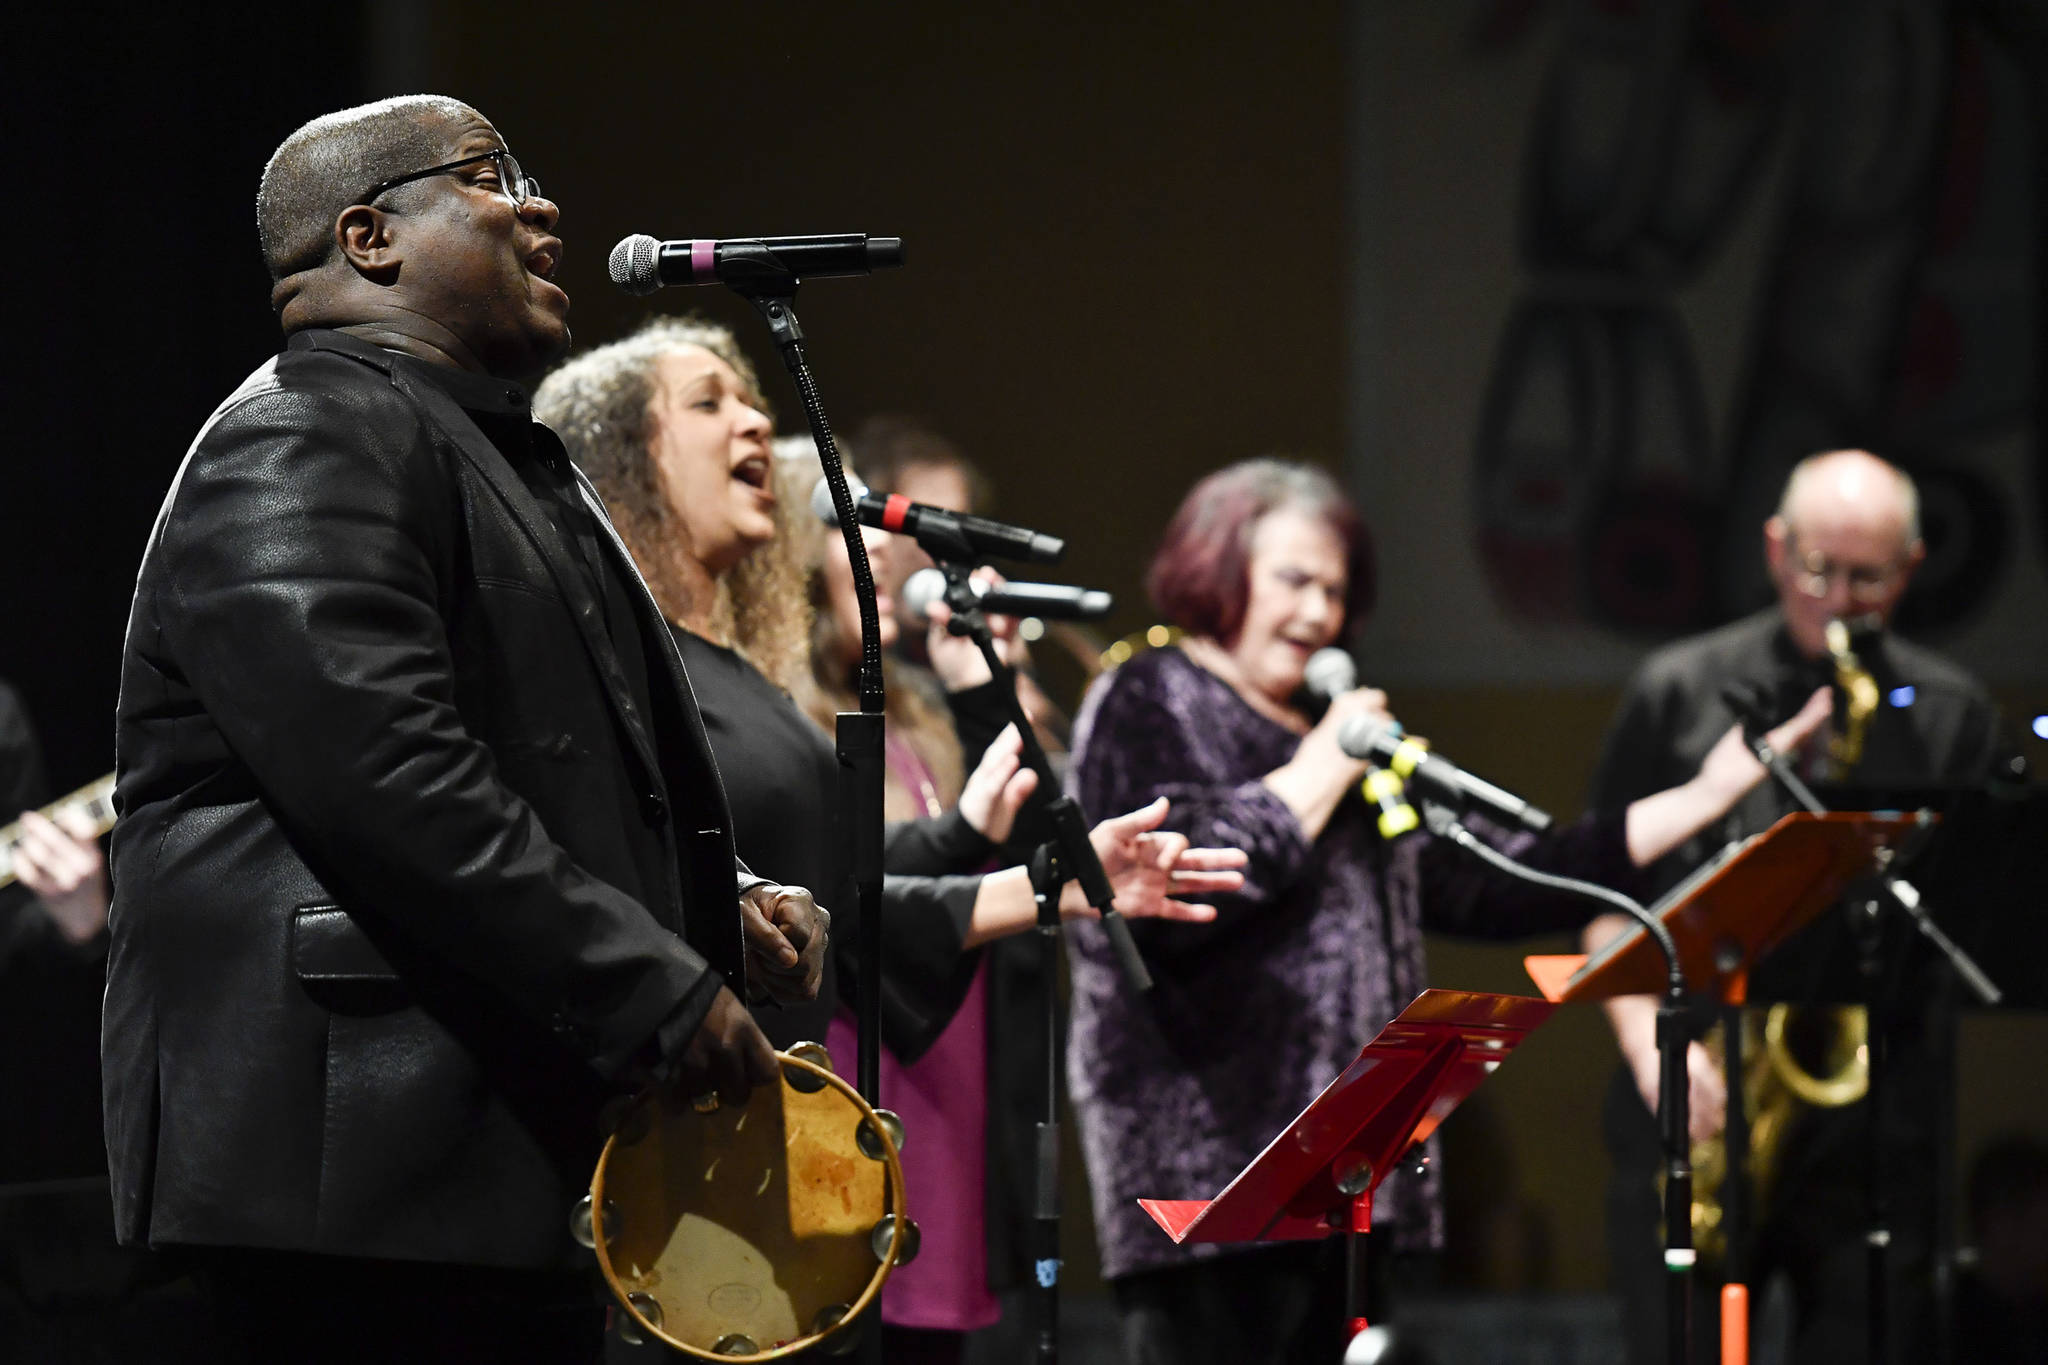 Bobby Lewis, left, and Jaunelle Celaire sing during the performance of “Motown for Our Town” at the Juneau Arts & Culture Center on Friday, March 1, 2019. (Michael Penn | Juneau Empire)